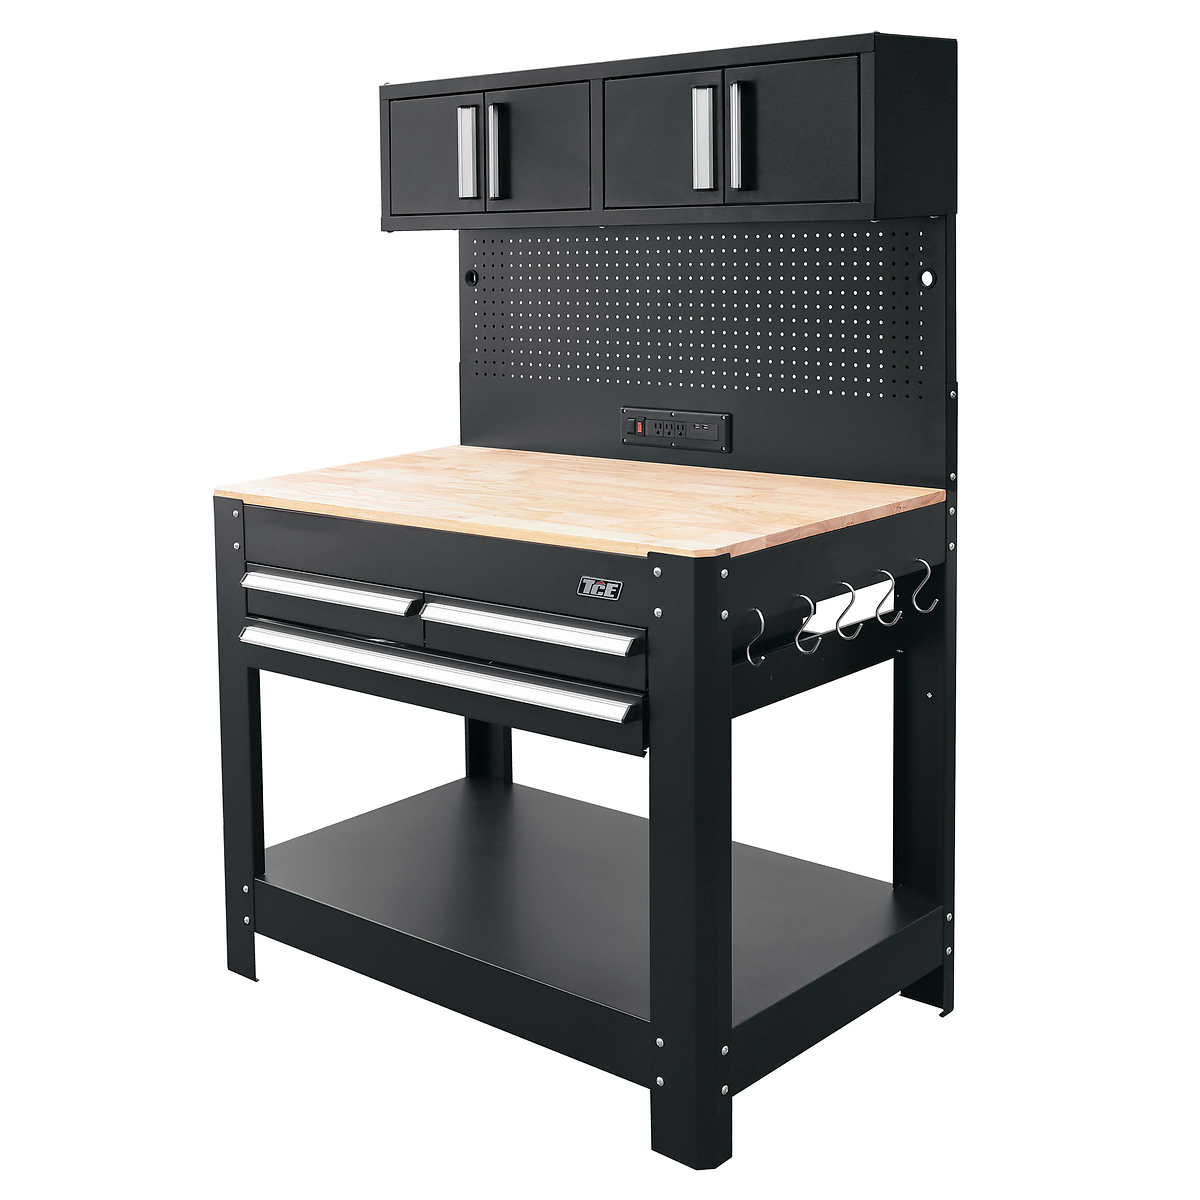 Kobalt Workbench Stainless Steel: Boost Productivity with Ultimate Durability